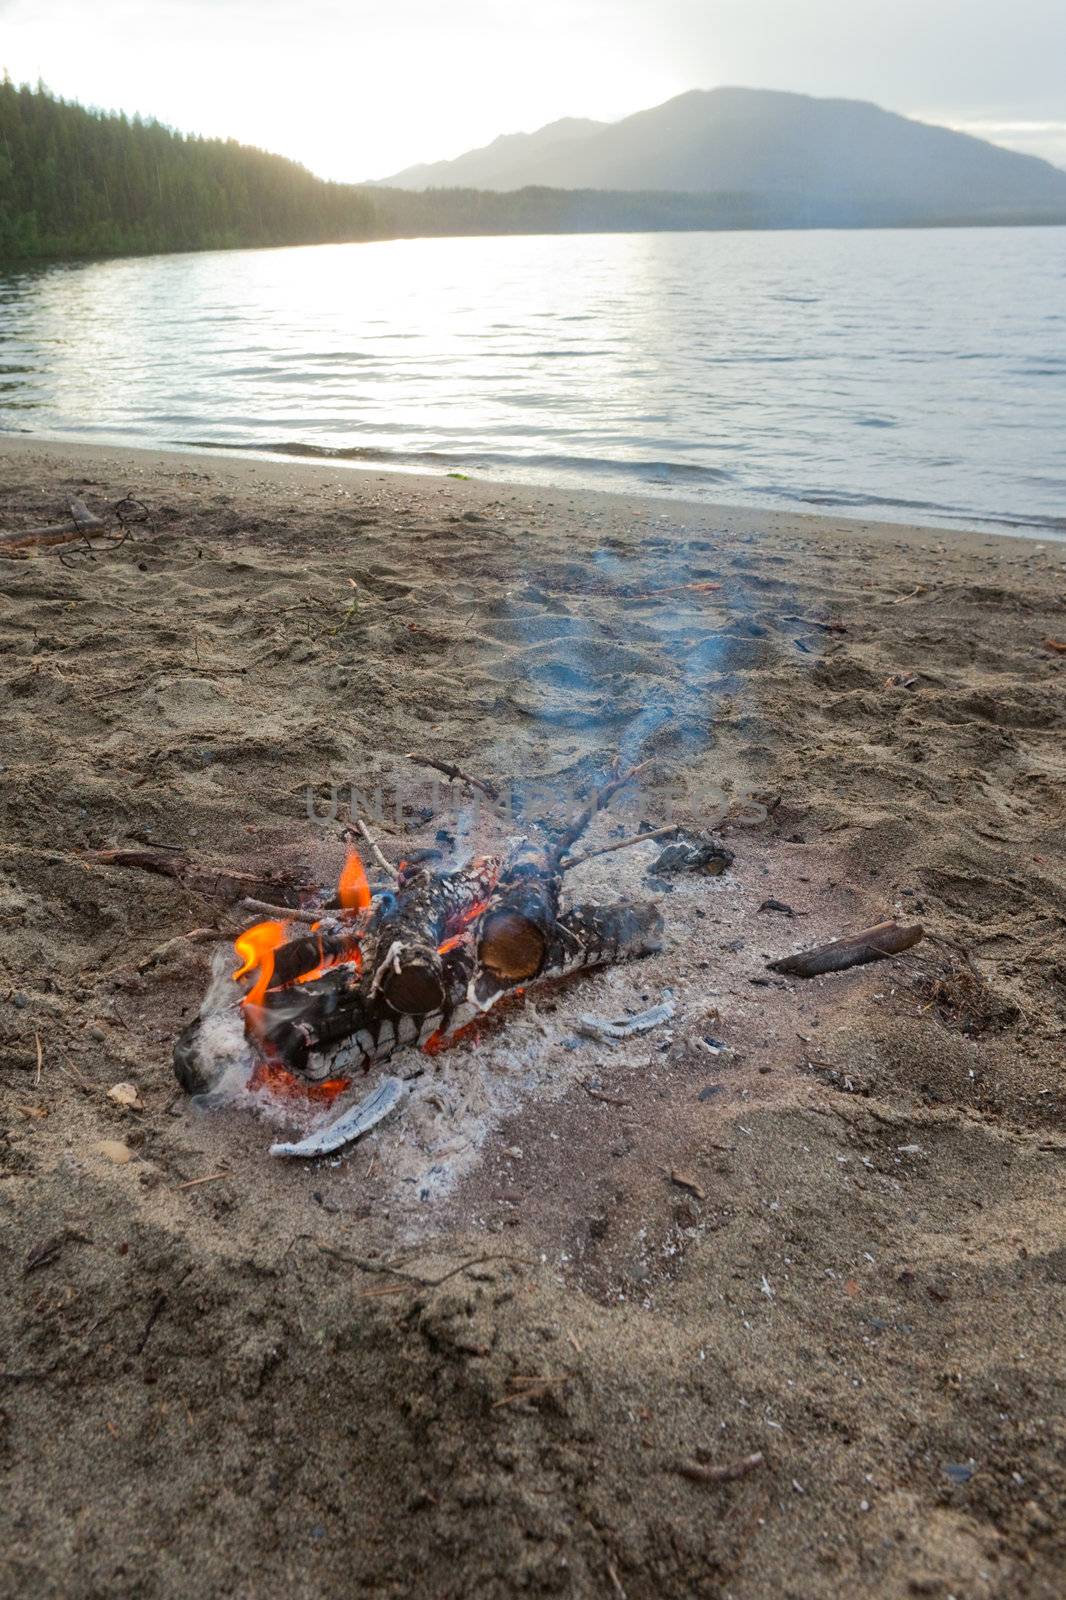 Campfire at beach by PiLens